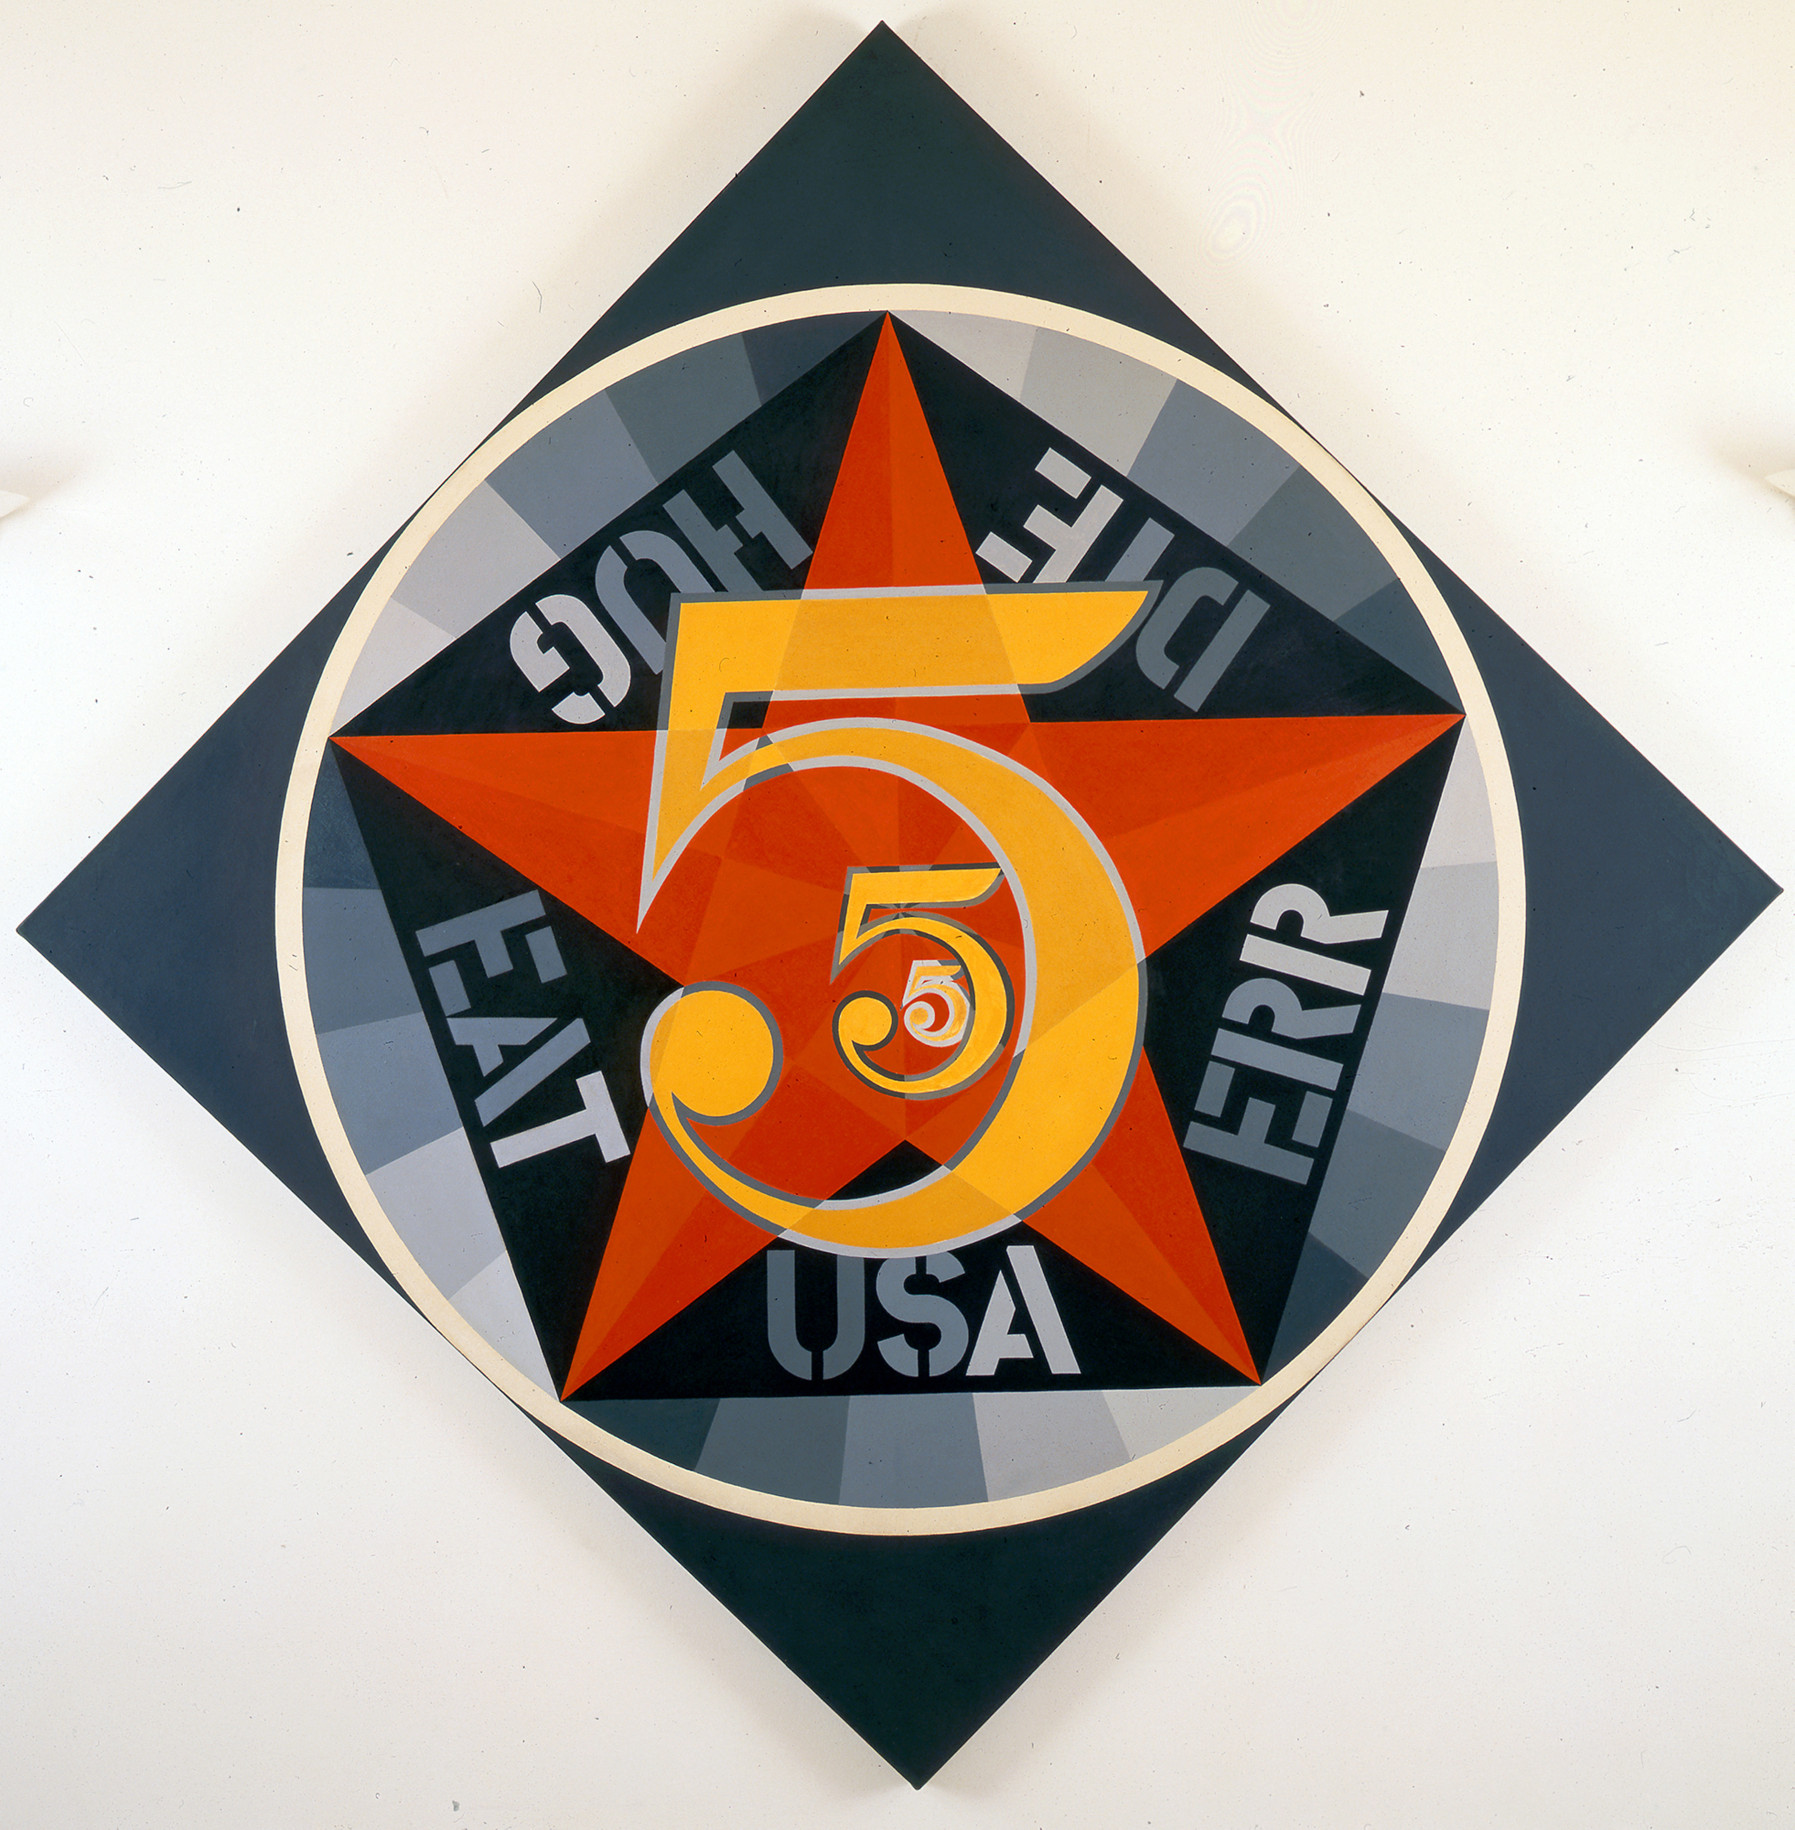 Diamond shaped canvas dominated by a large circle containing three golden numeral fives agains a red star within a pentagon. Five words appear, one on each side of the pentagon. Starting with the bottom word and reading counter clockwise they are: USA, ERR, DIE, HUG, and EAT.